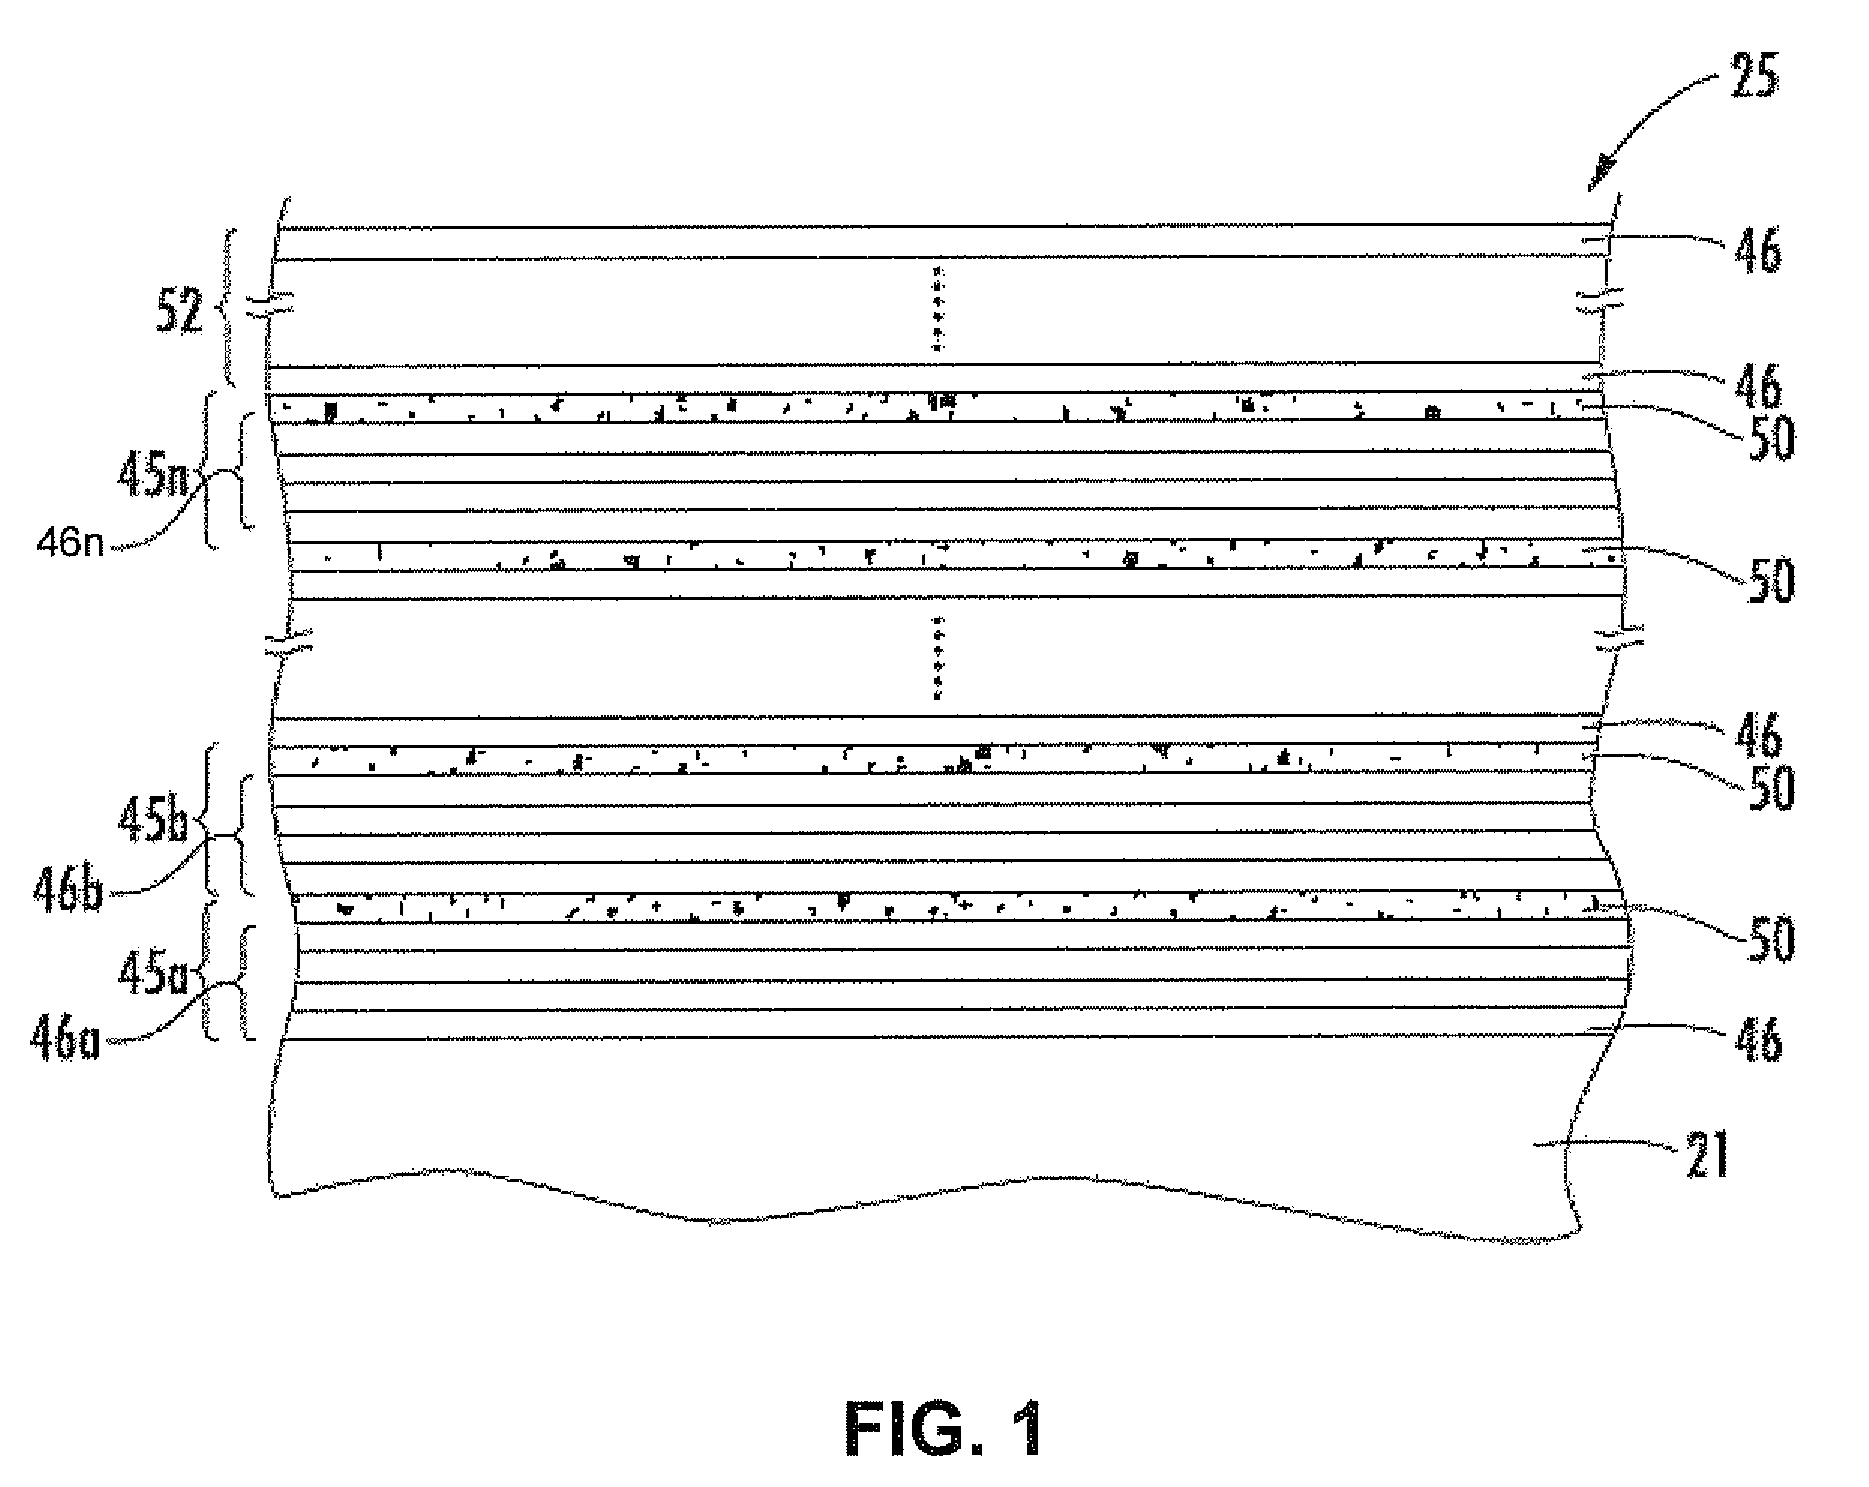 Semiconductor device including a metal-to-semiconductor superlattice interface layer and related methods